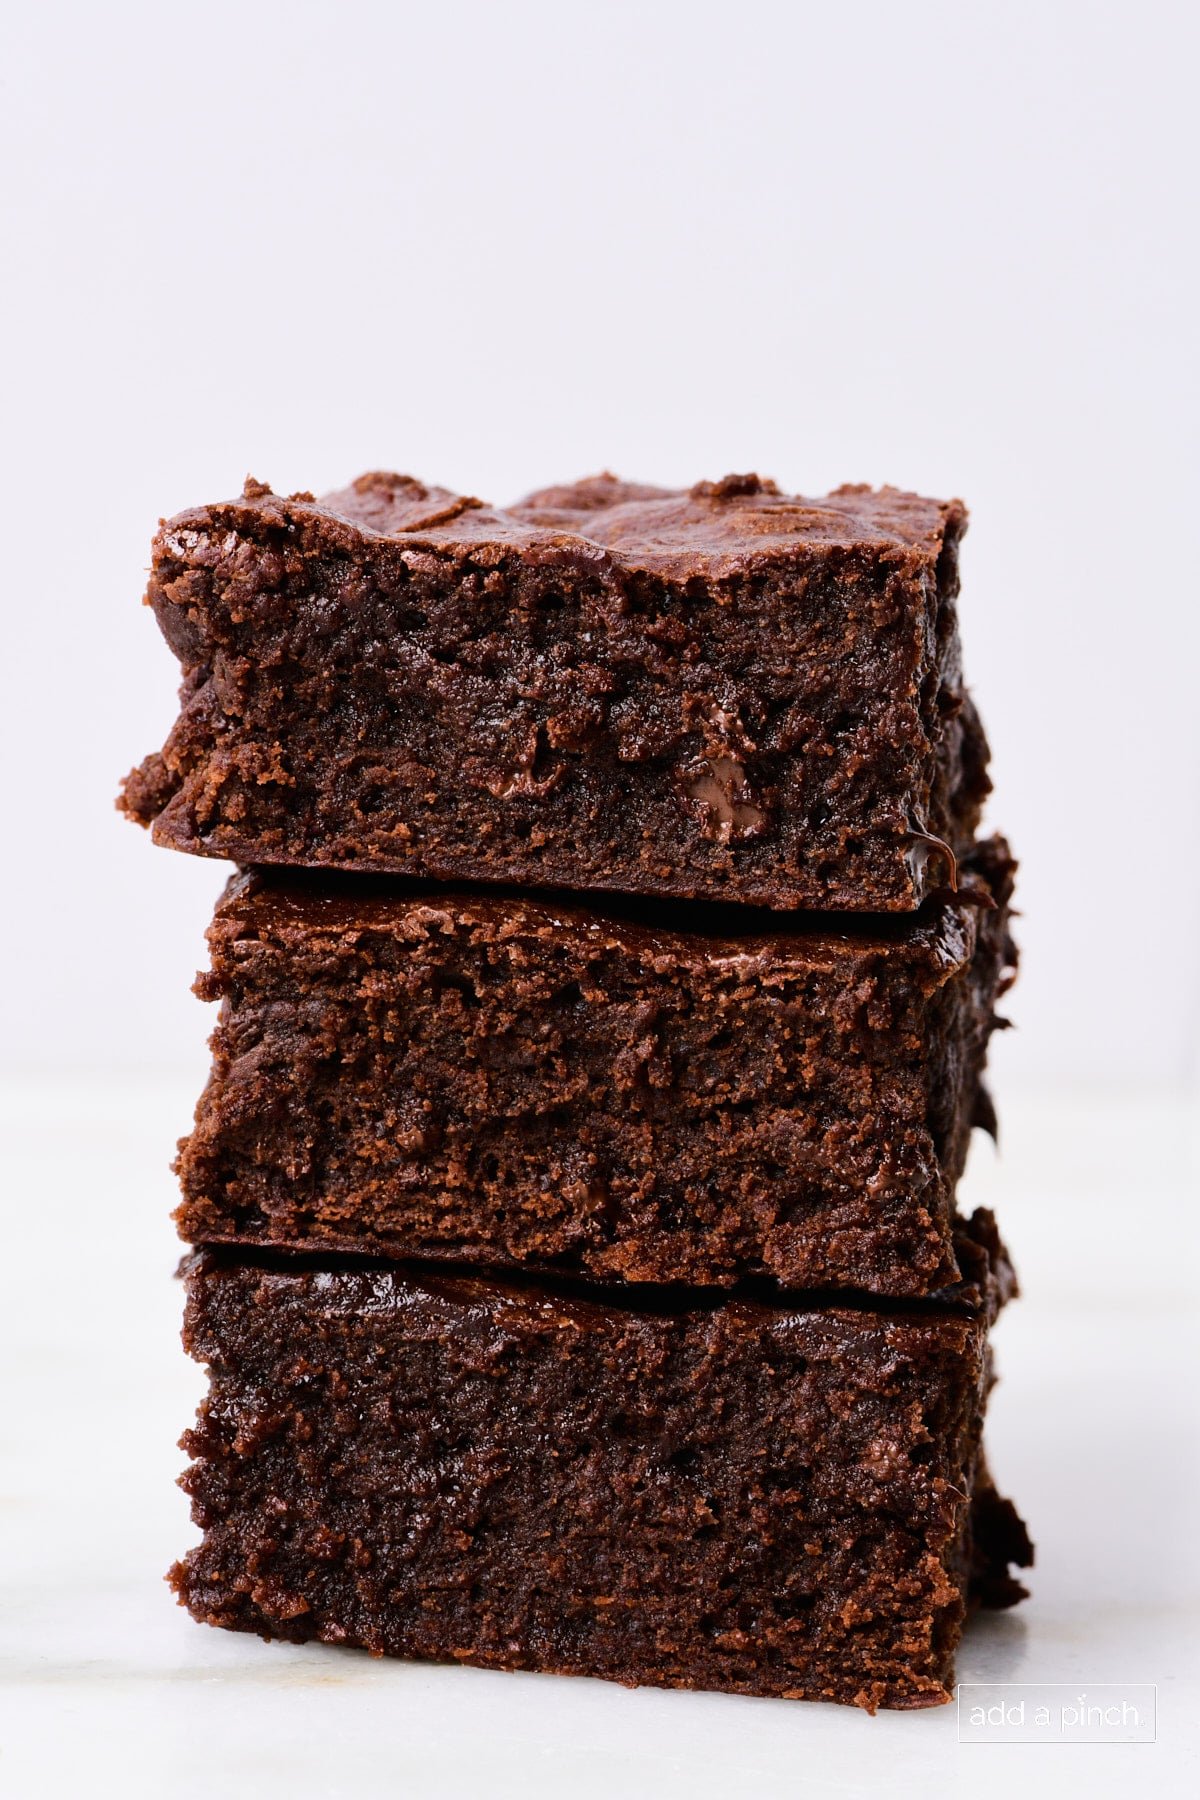 Stack of the best brownies on a marble countertop with a white background.